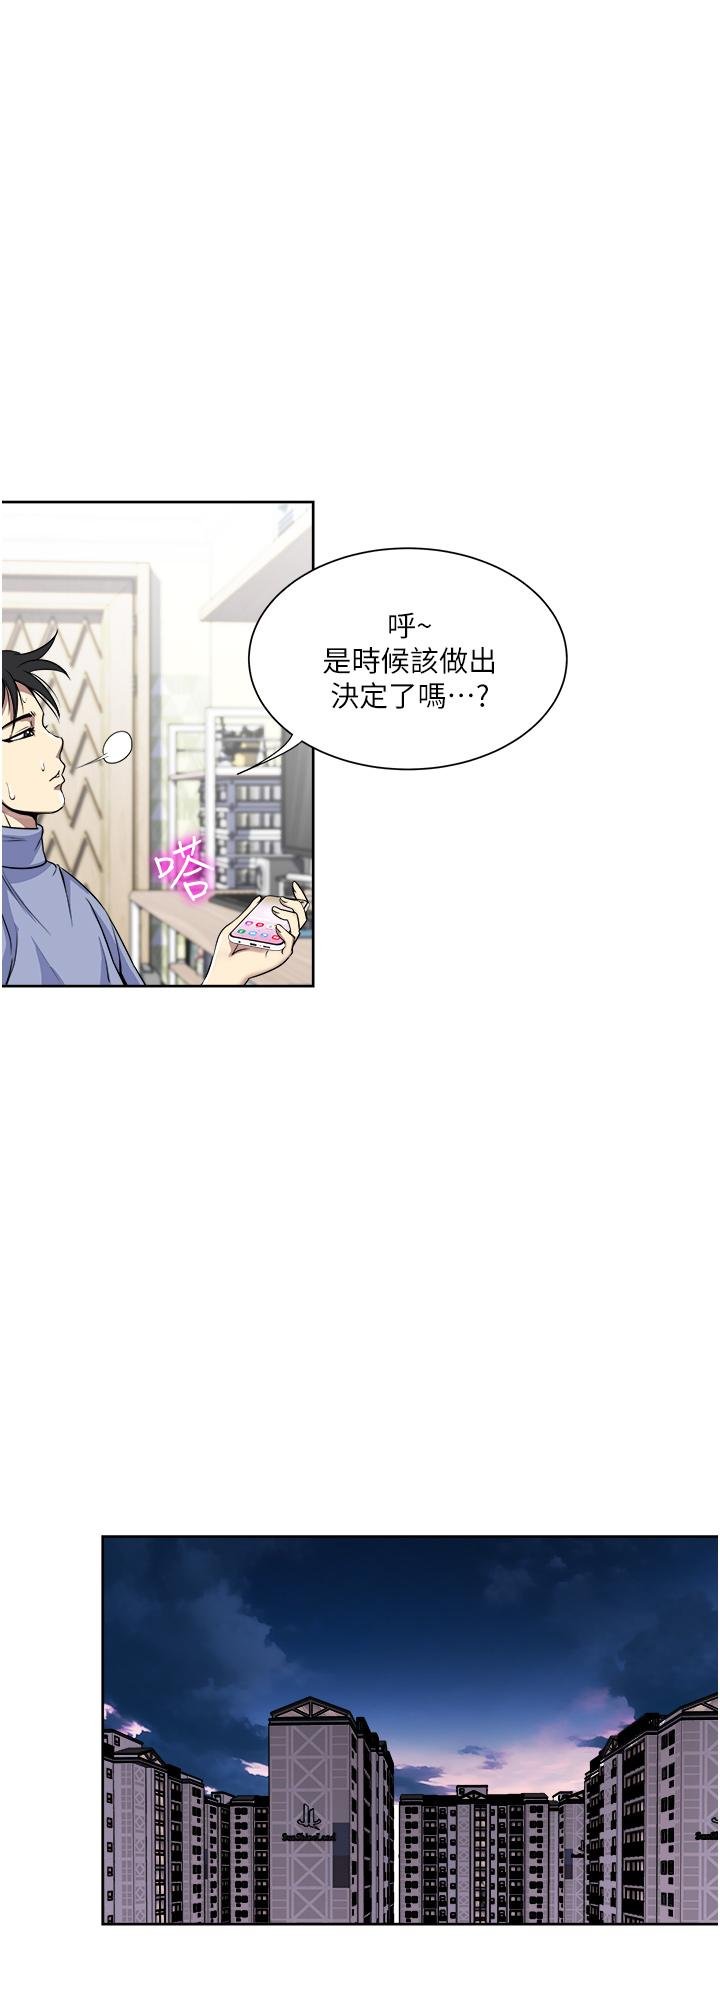 just-once-raw-chap-37-21